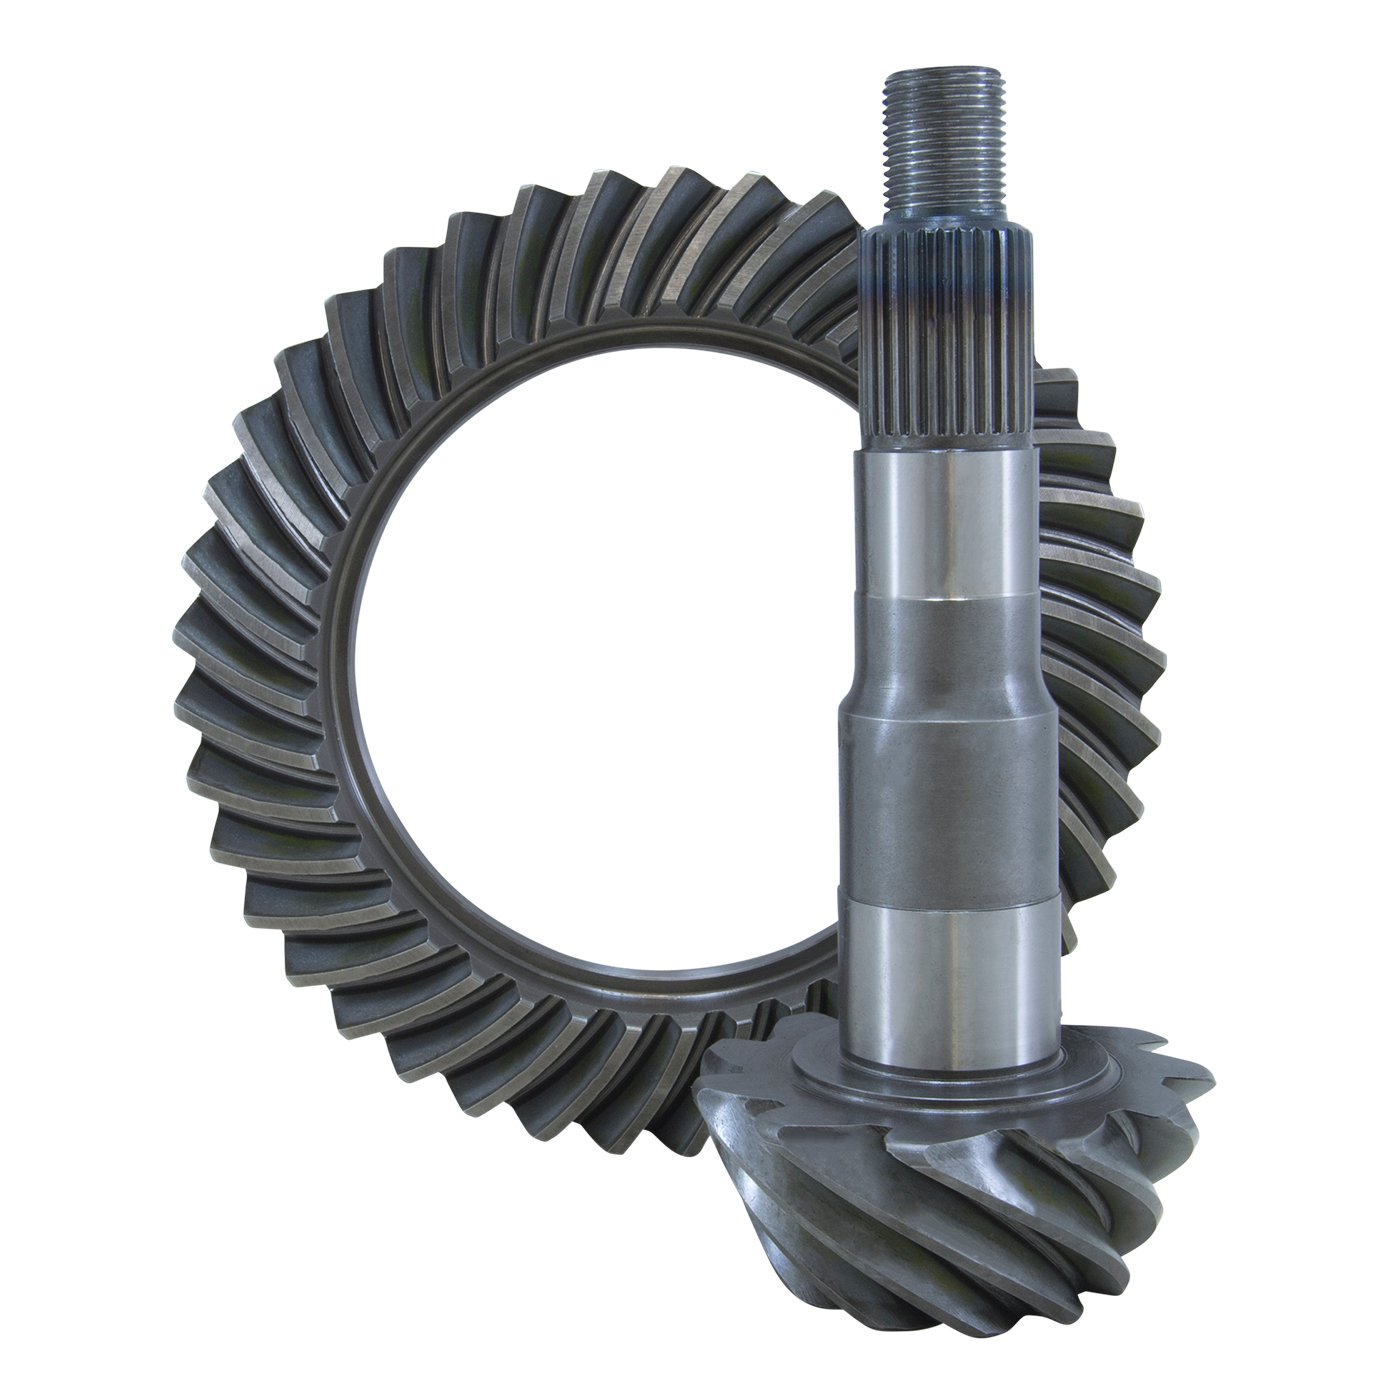 USA Standard 36058 Replacement Ring & Pinion Gear Set, For Dana 44Hd In 4.11 Ratio